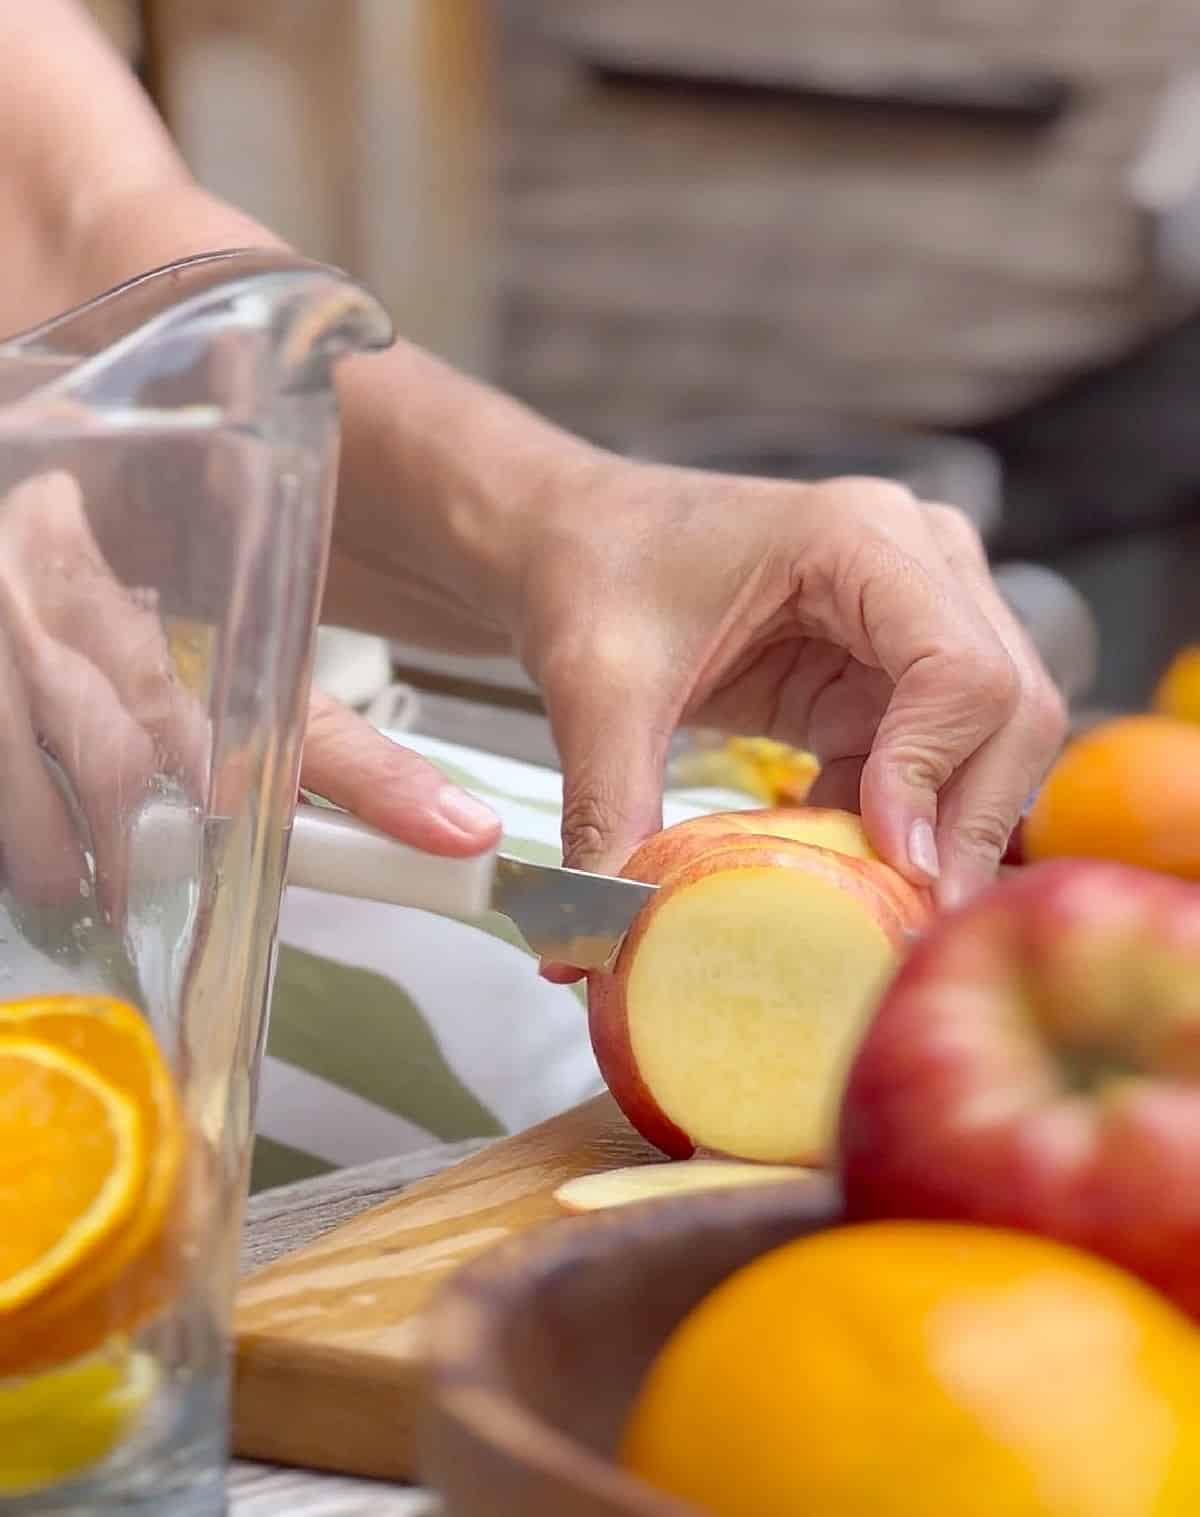 Cutting a peach in slices on a board, a pitcher with sliced oranges and bowl of fruit.